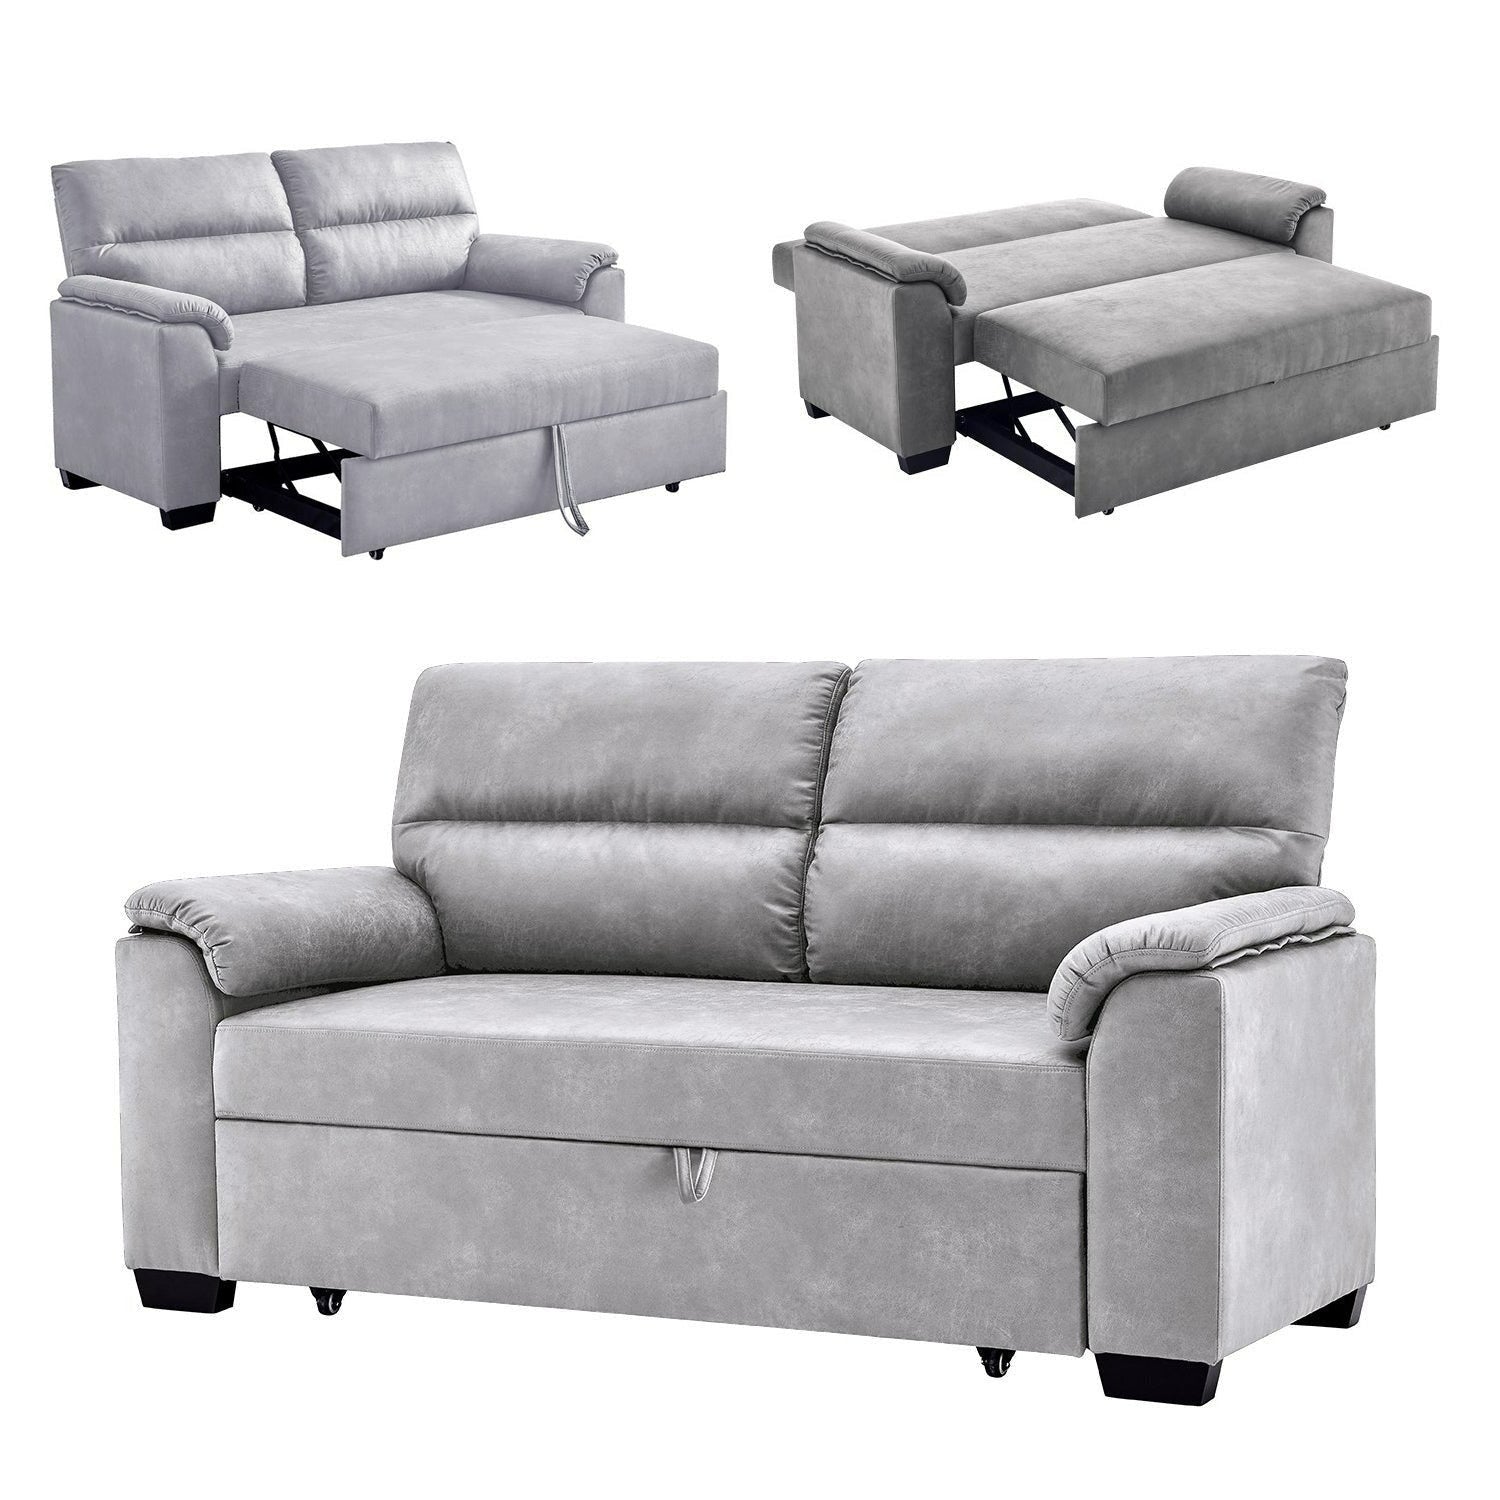 Foret 2 Seater Sofa Bed Pullout Futon Lounge Couch Padded Comfort Fabric Grey